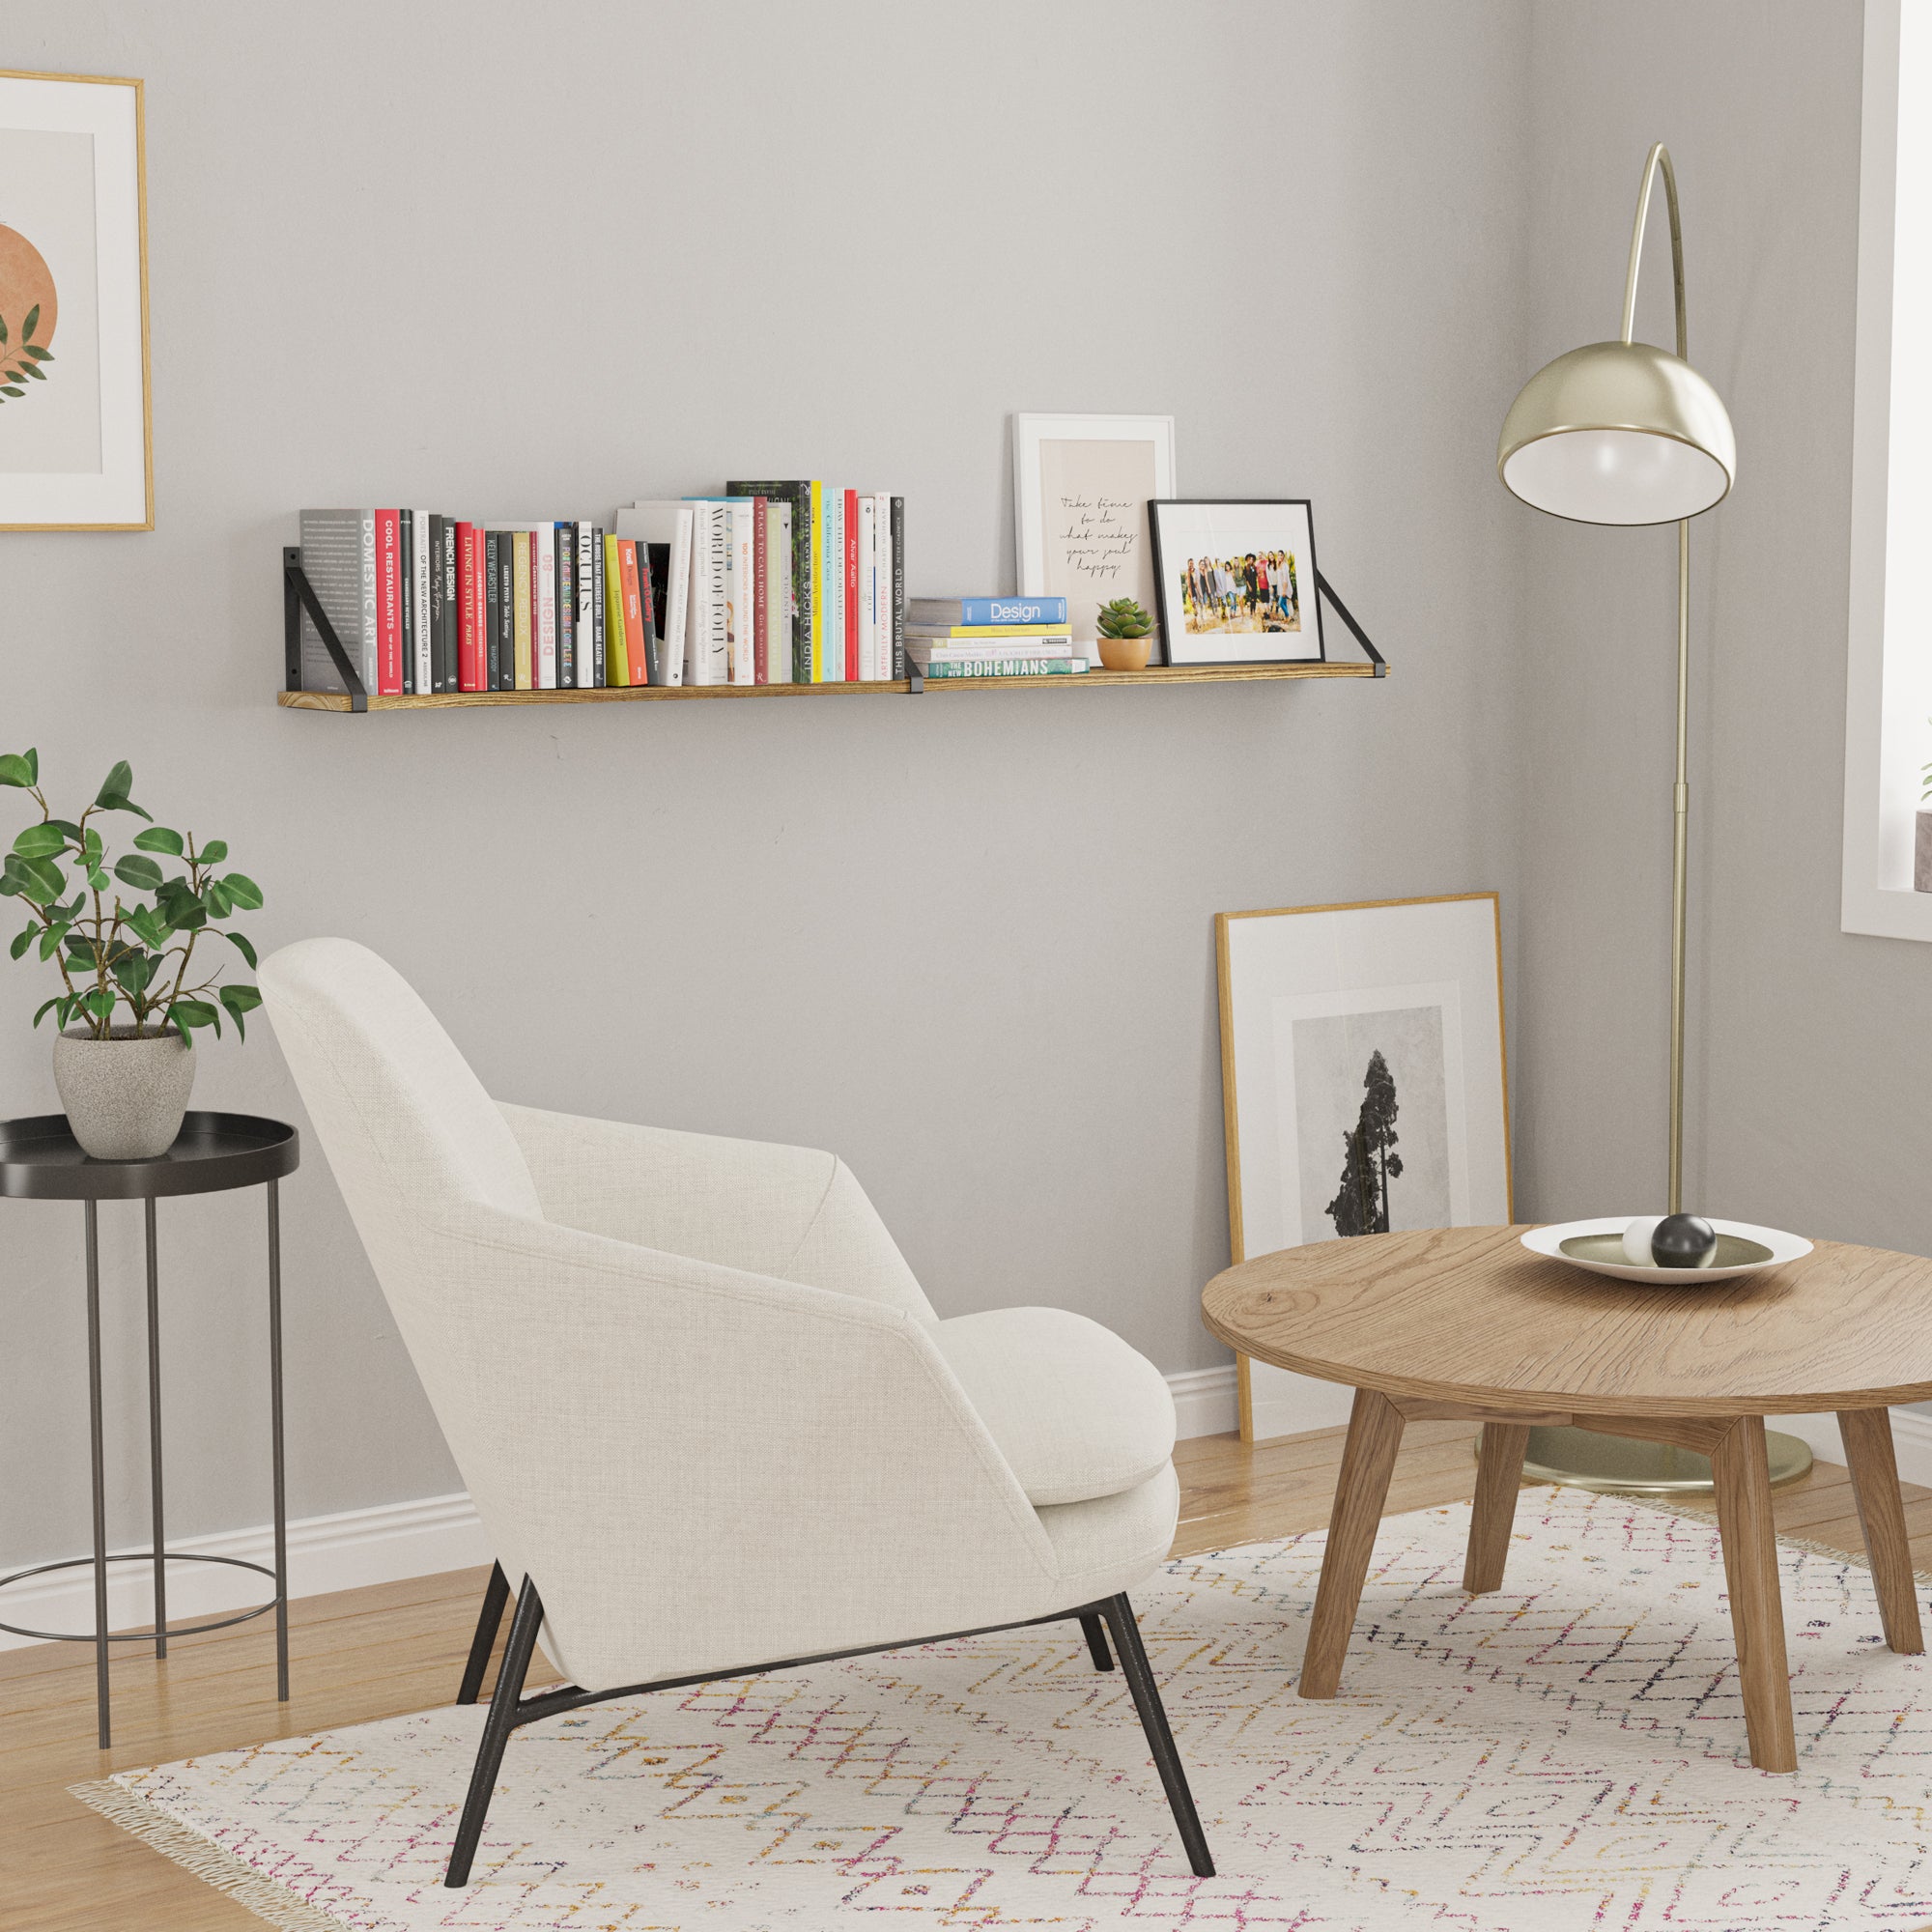 A cozy, modern living room corner with a gray wall. On the wall, there's a floating wall shelf packed with colorful books, and some framed photos leaning against the wall.